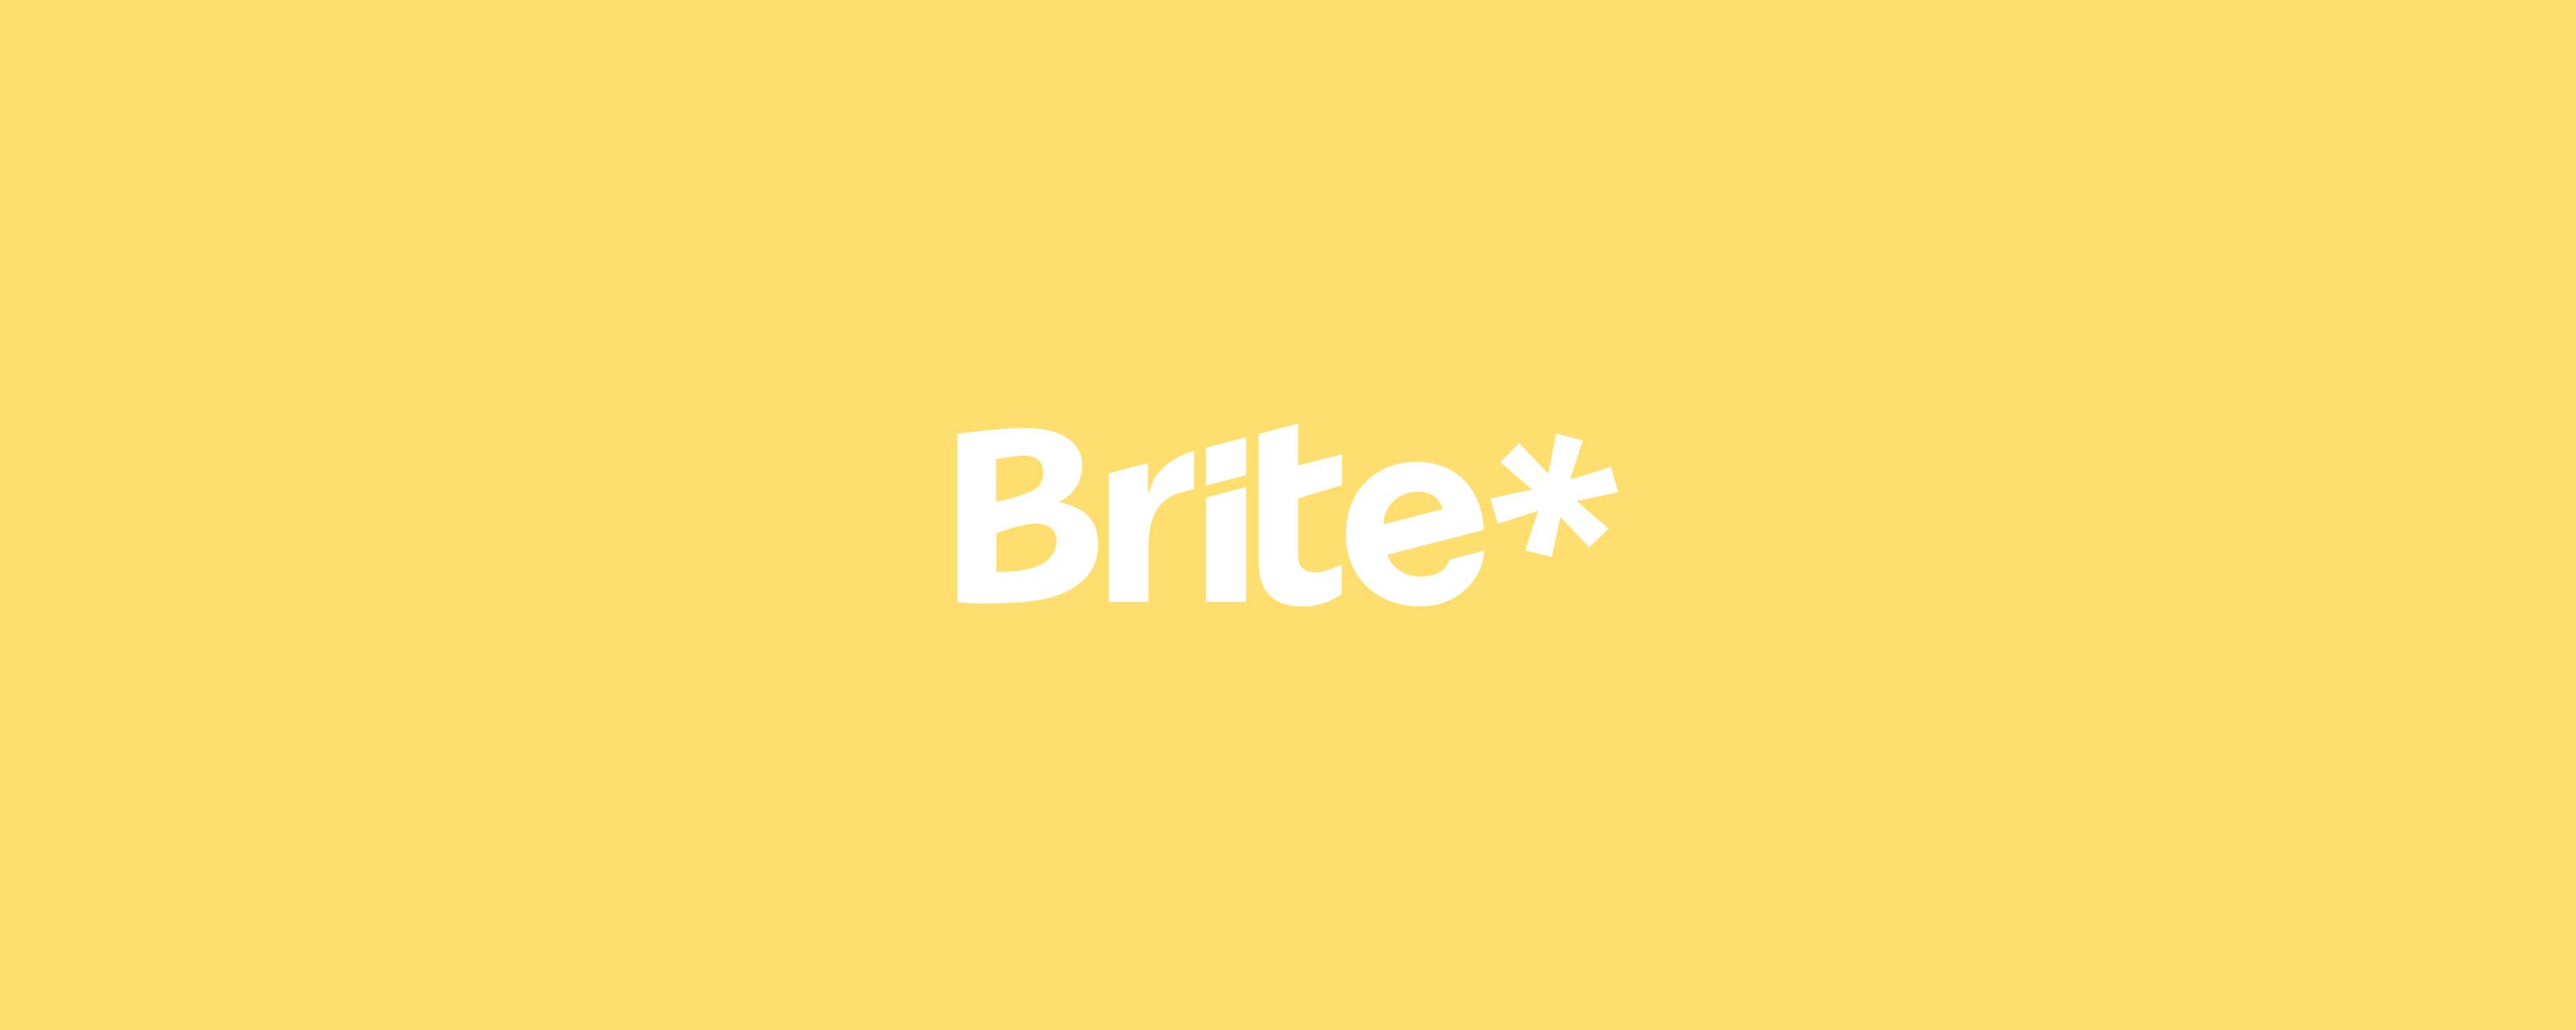 Brite Payments logo on a yellow background